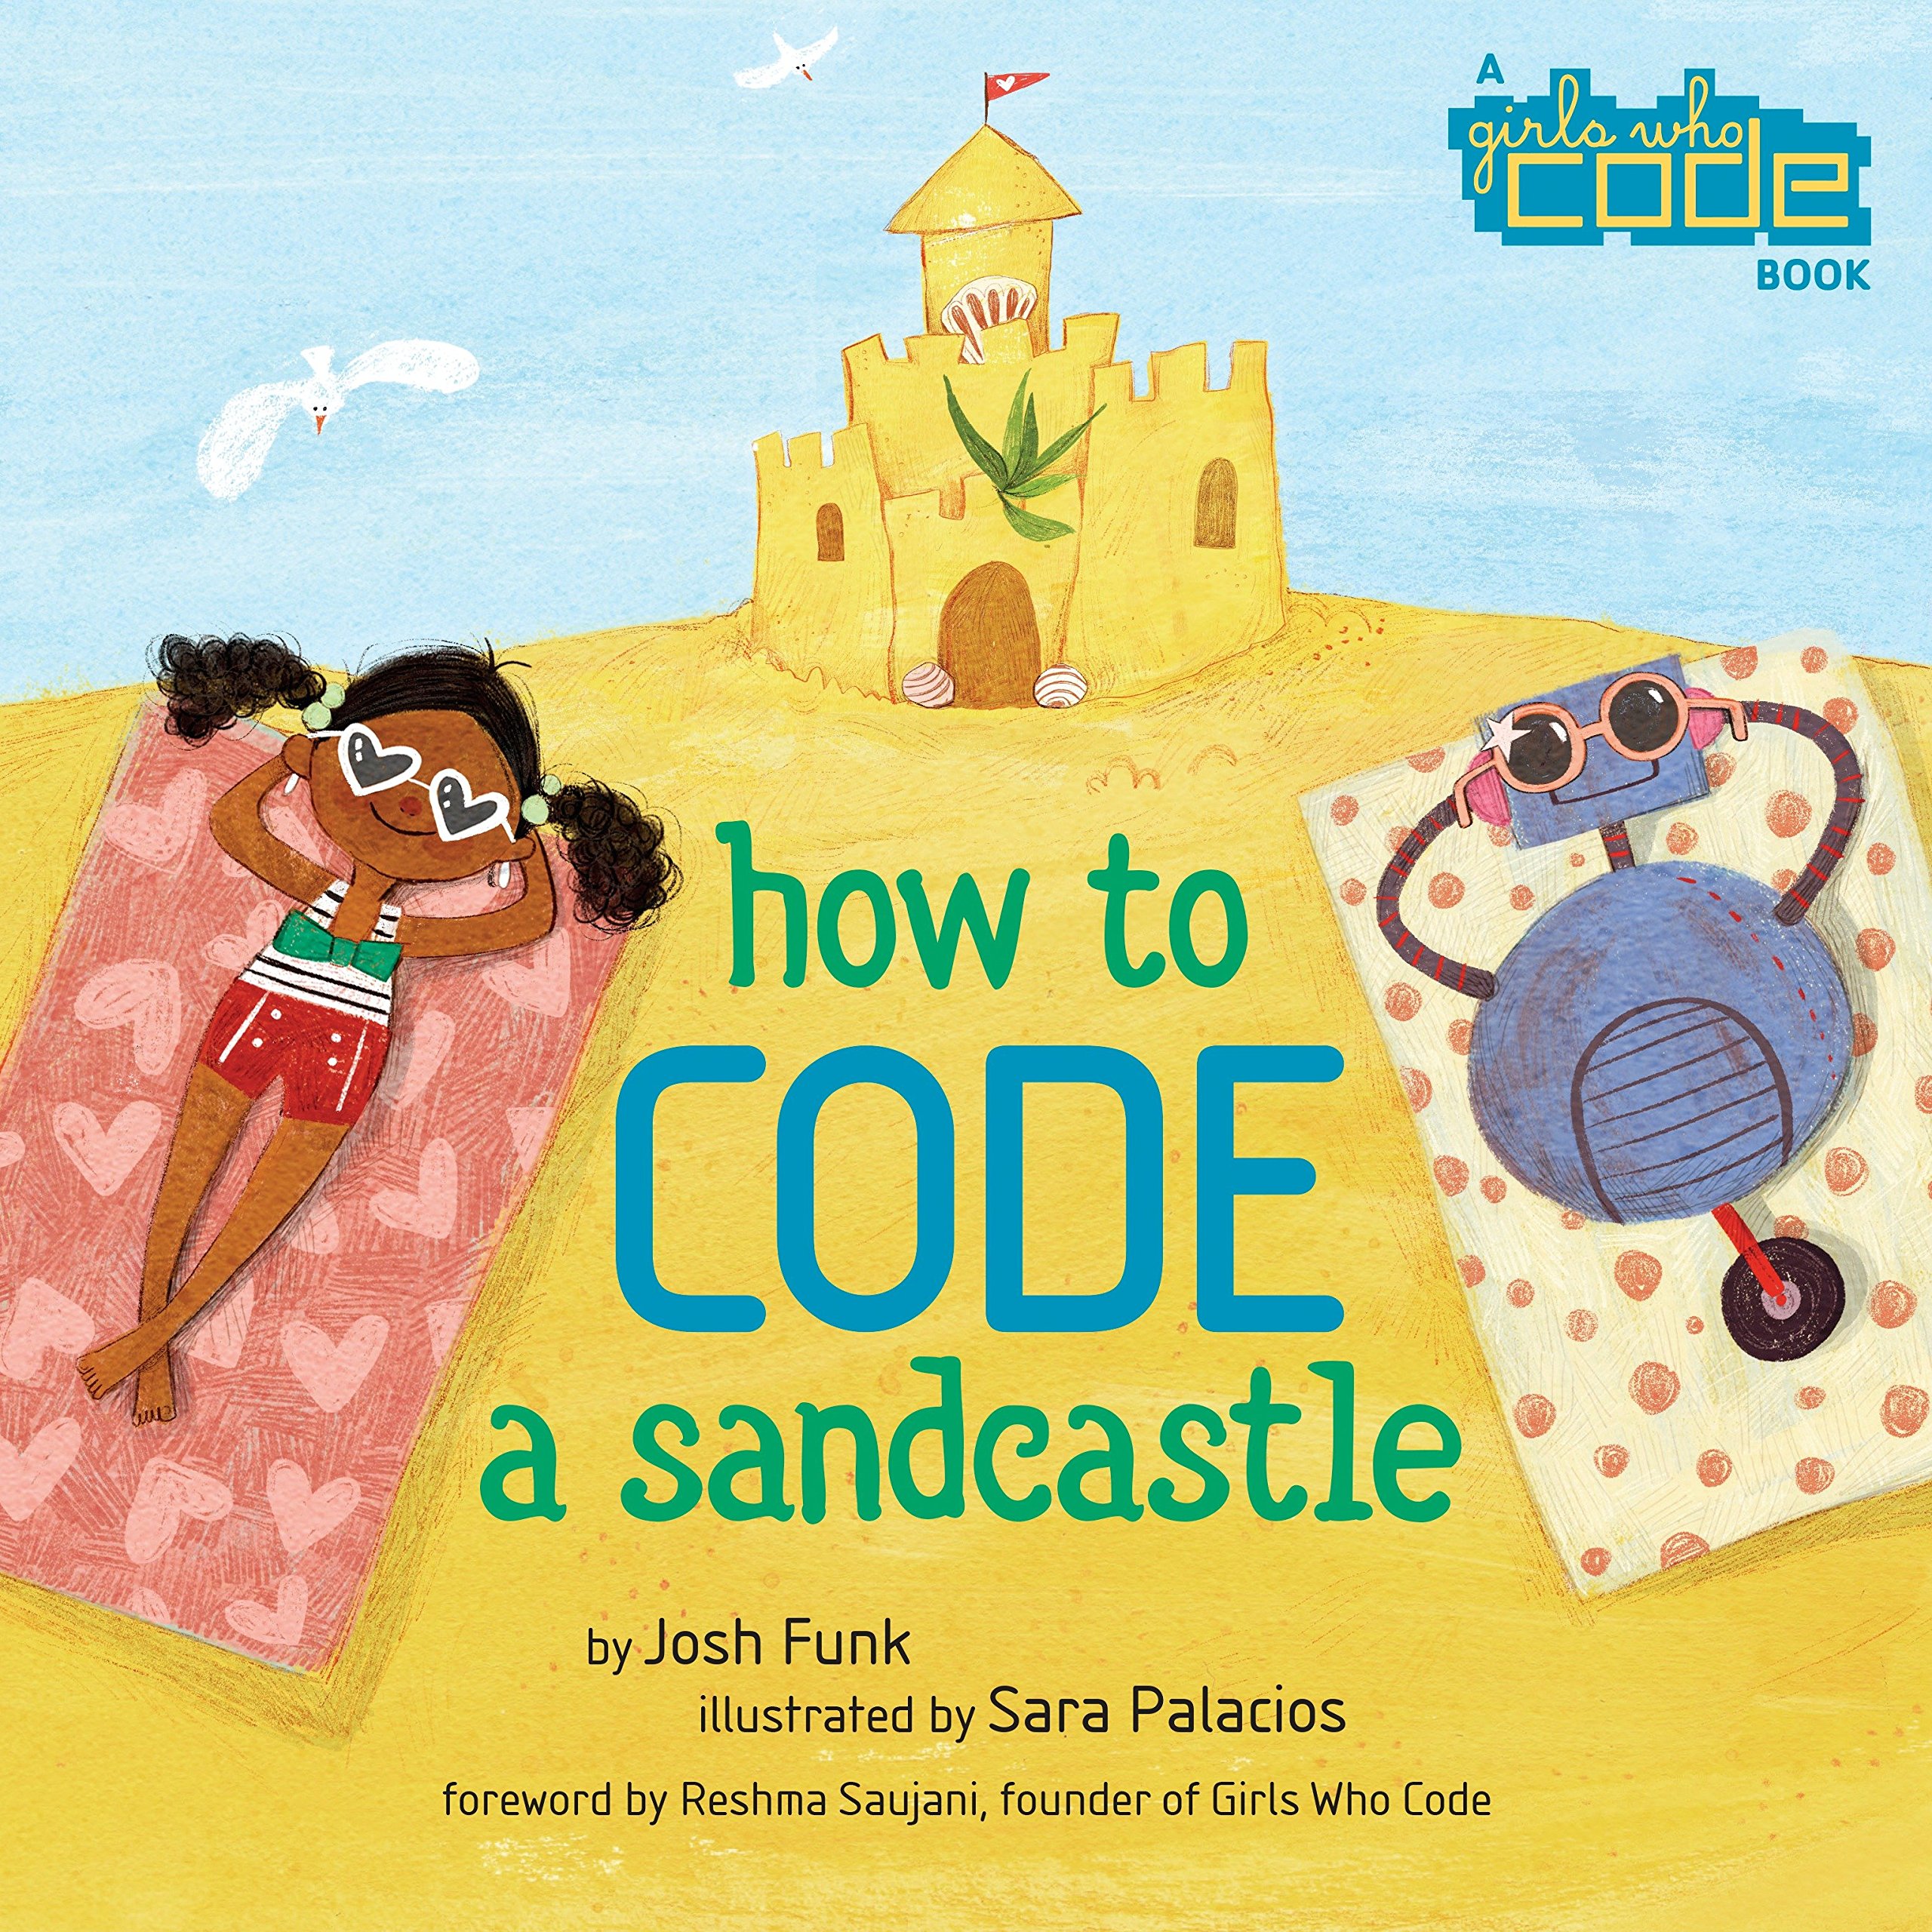 Image for "How to Code a Sandcastle"